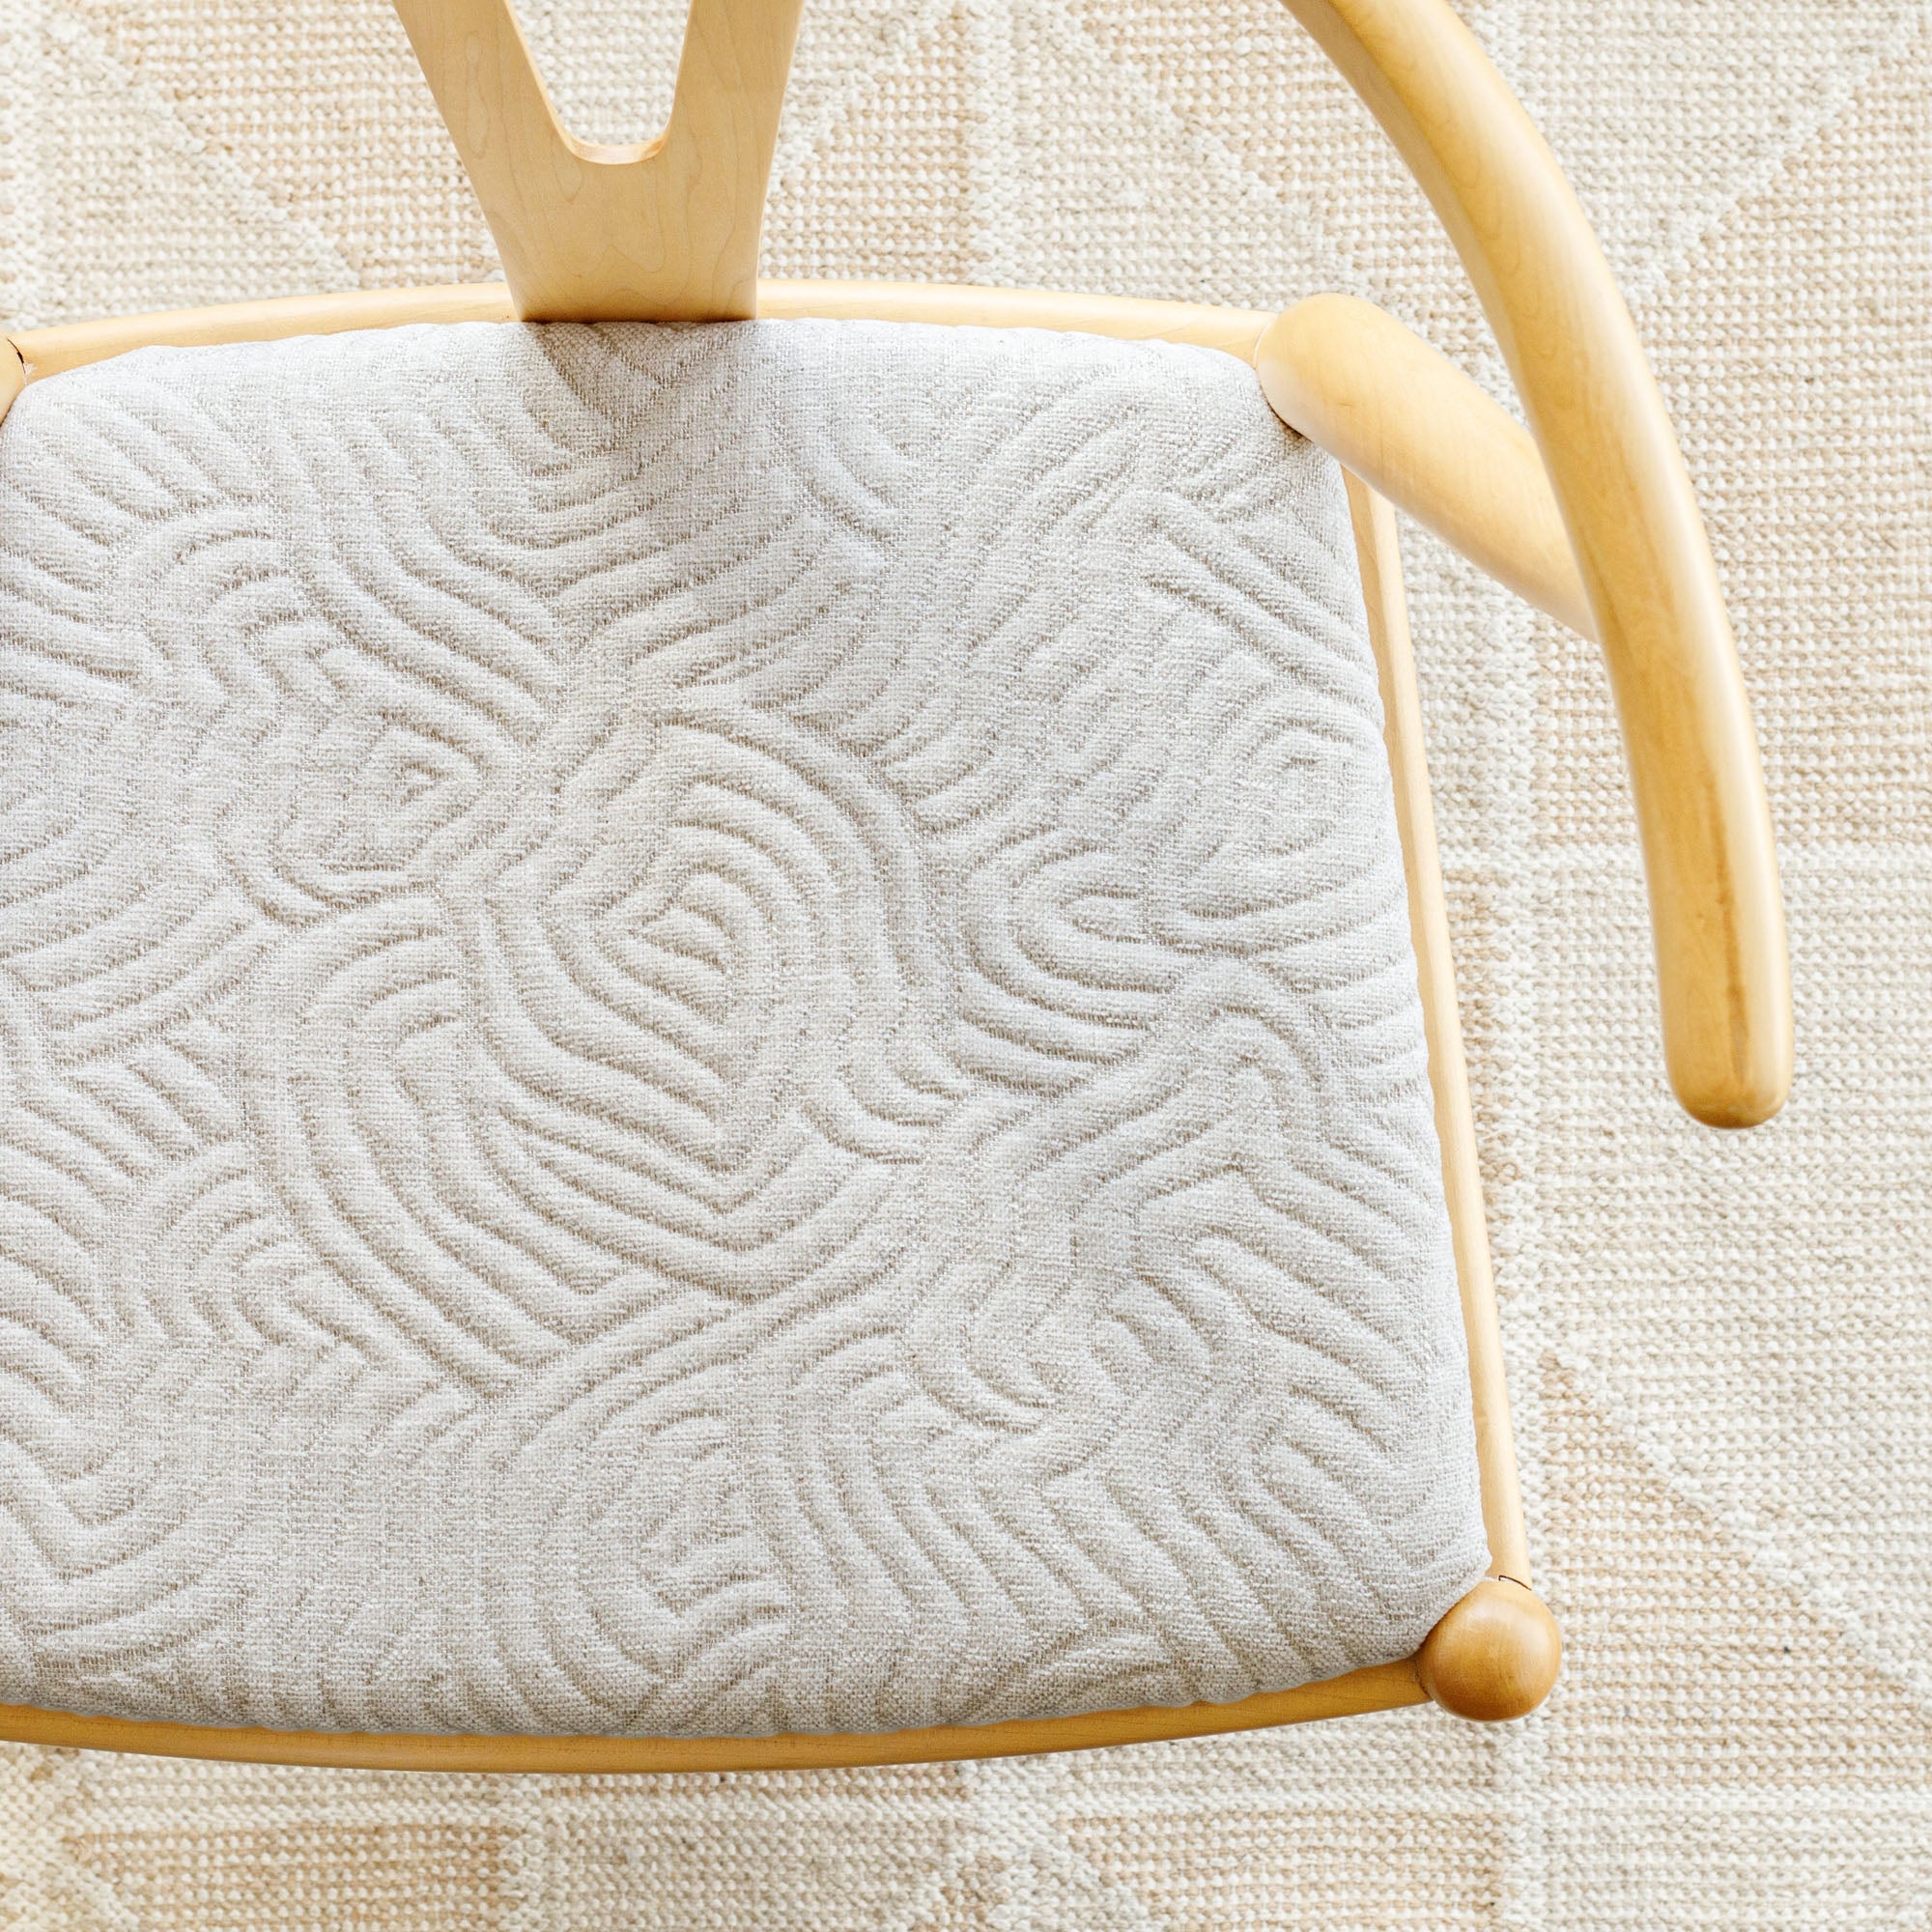 a cream quilted abstract wave patterned upholstered chair